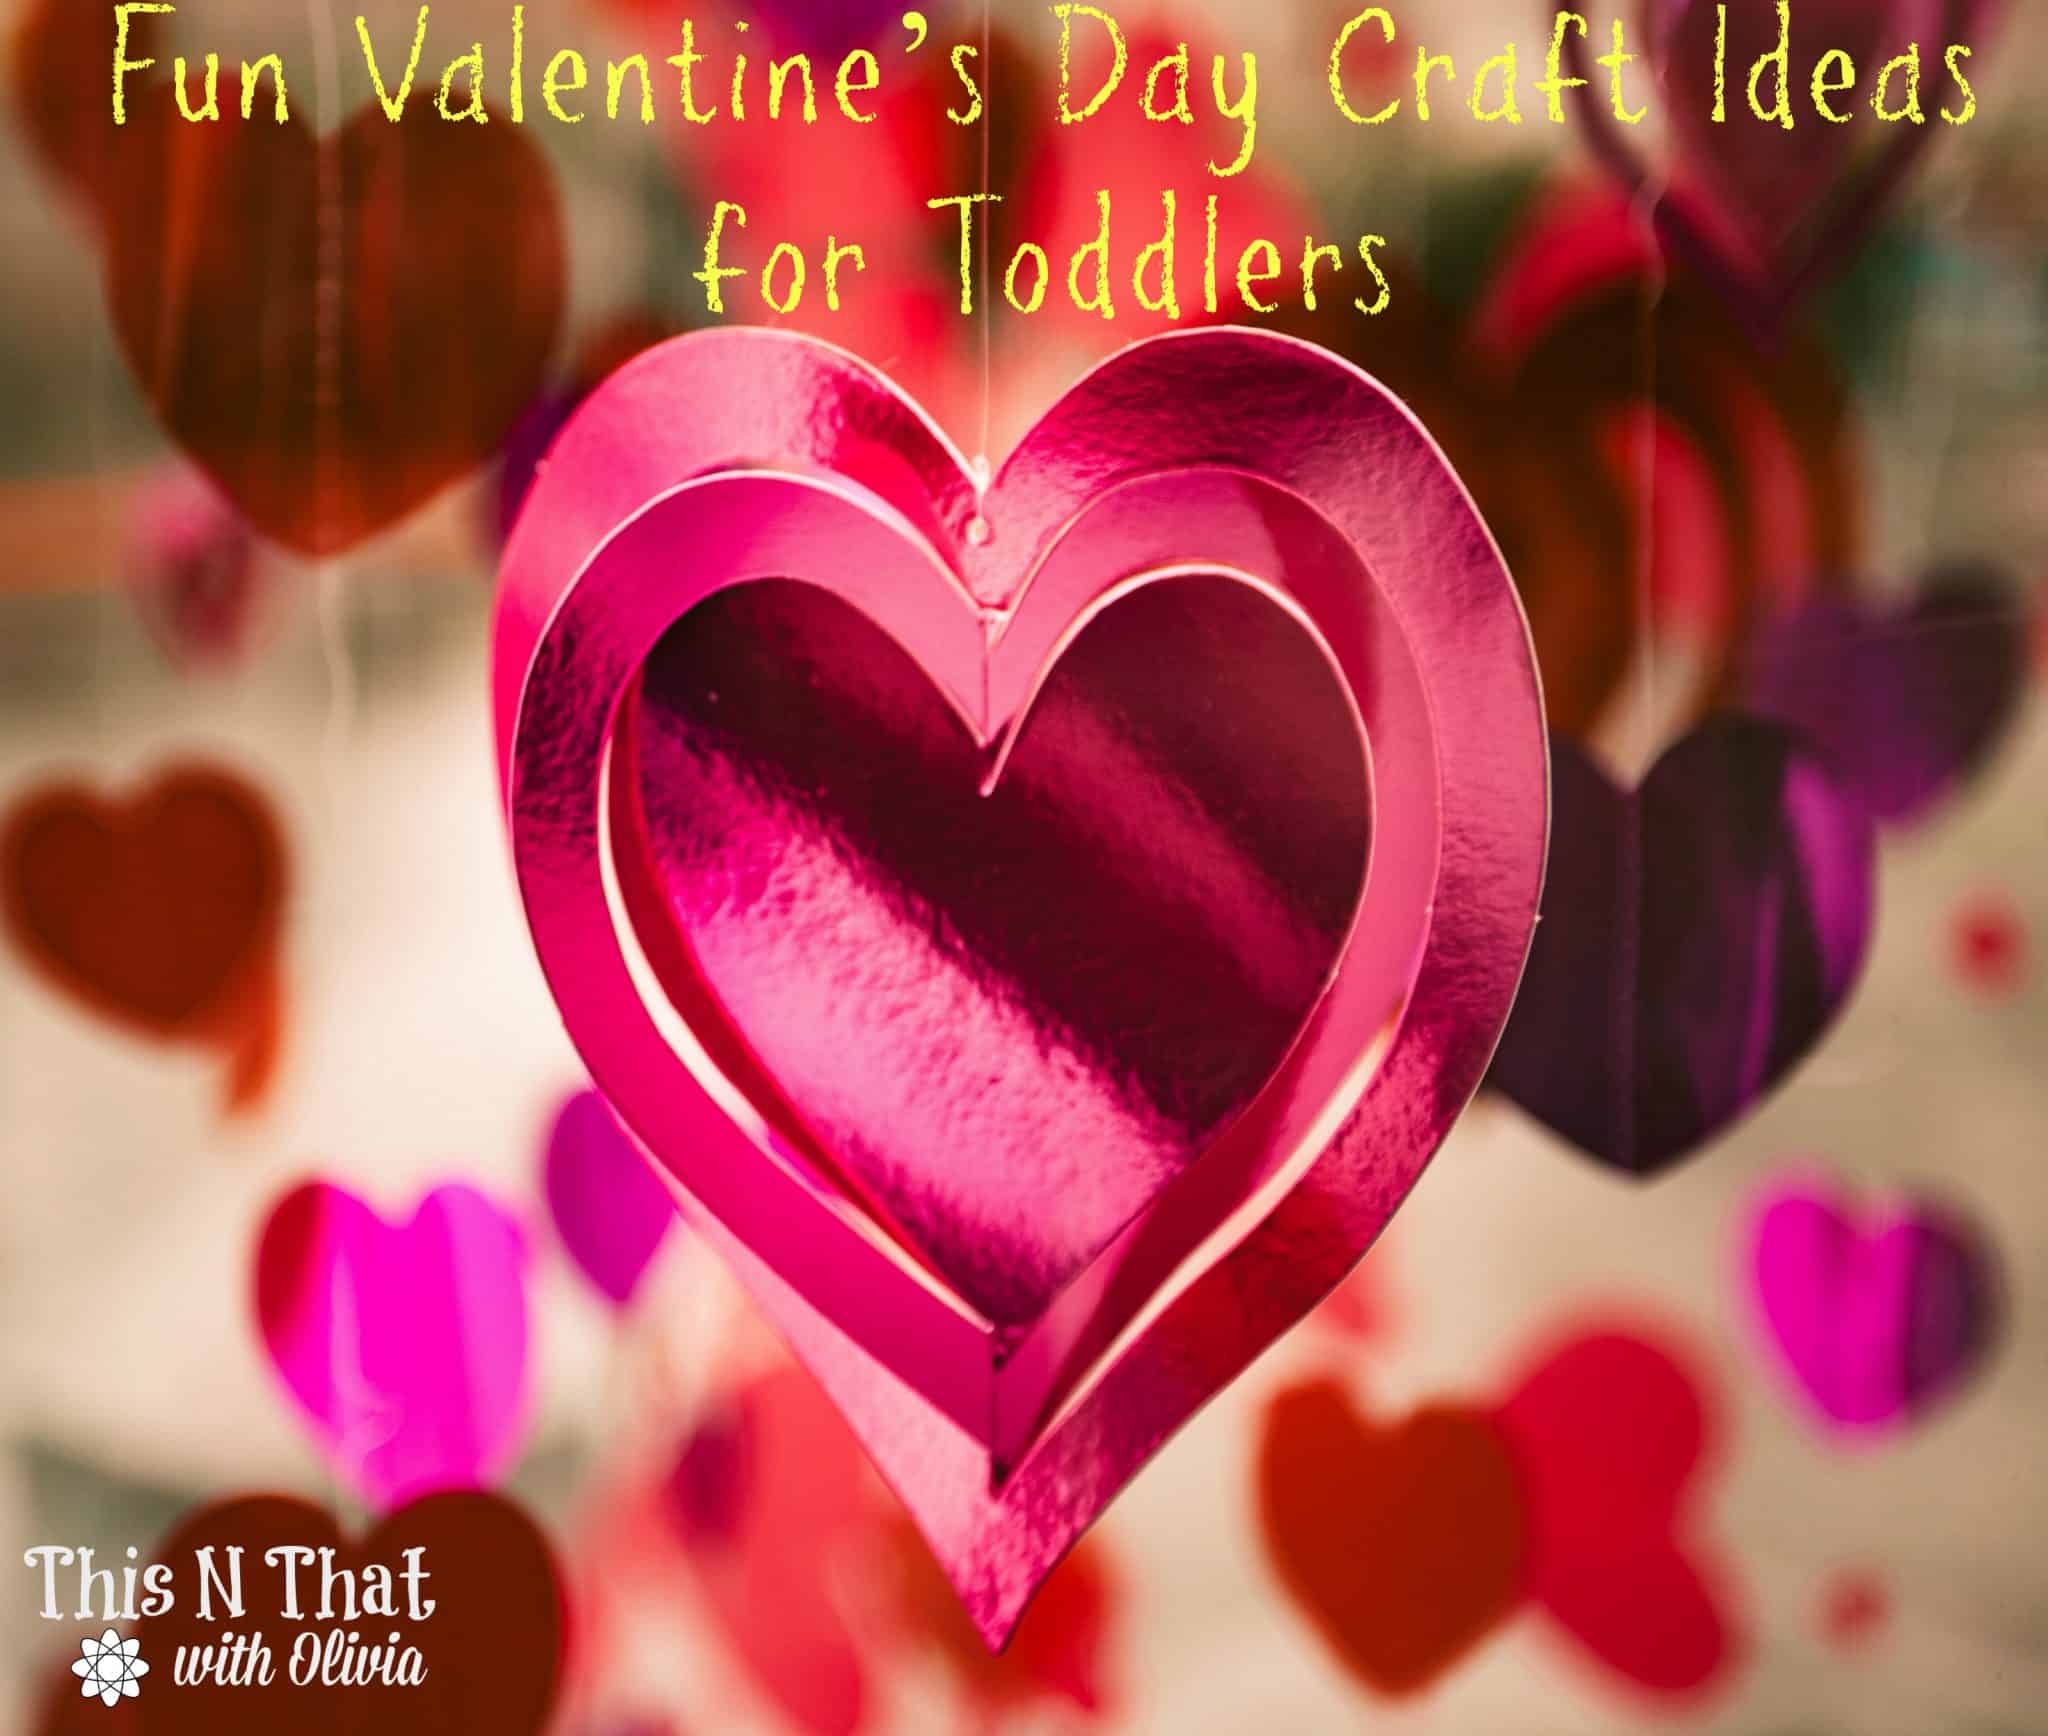 Fun Valentine’s Day Craft Ideas for Toddlers